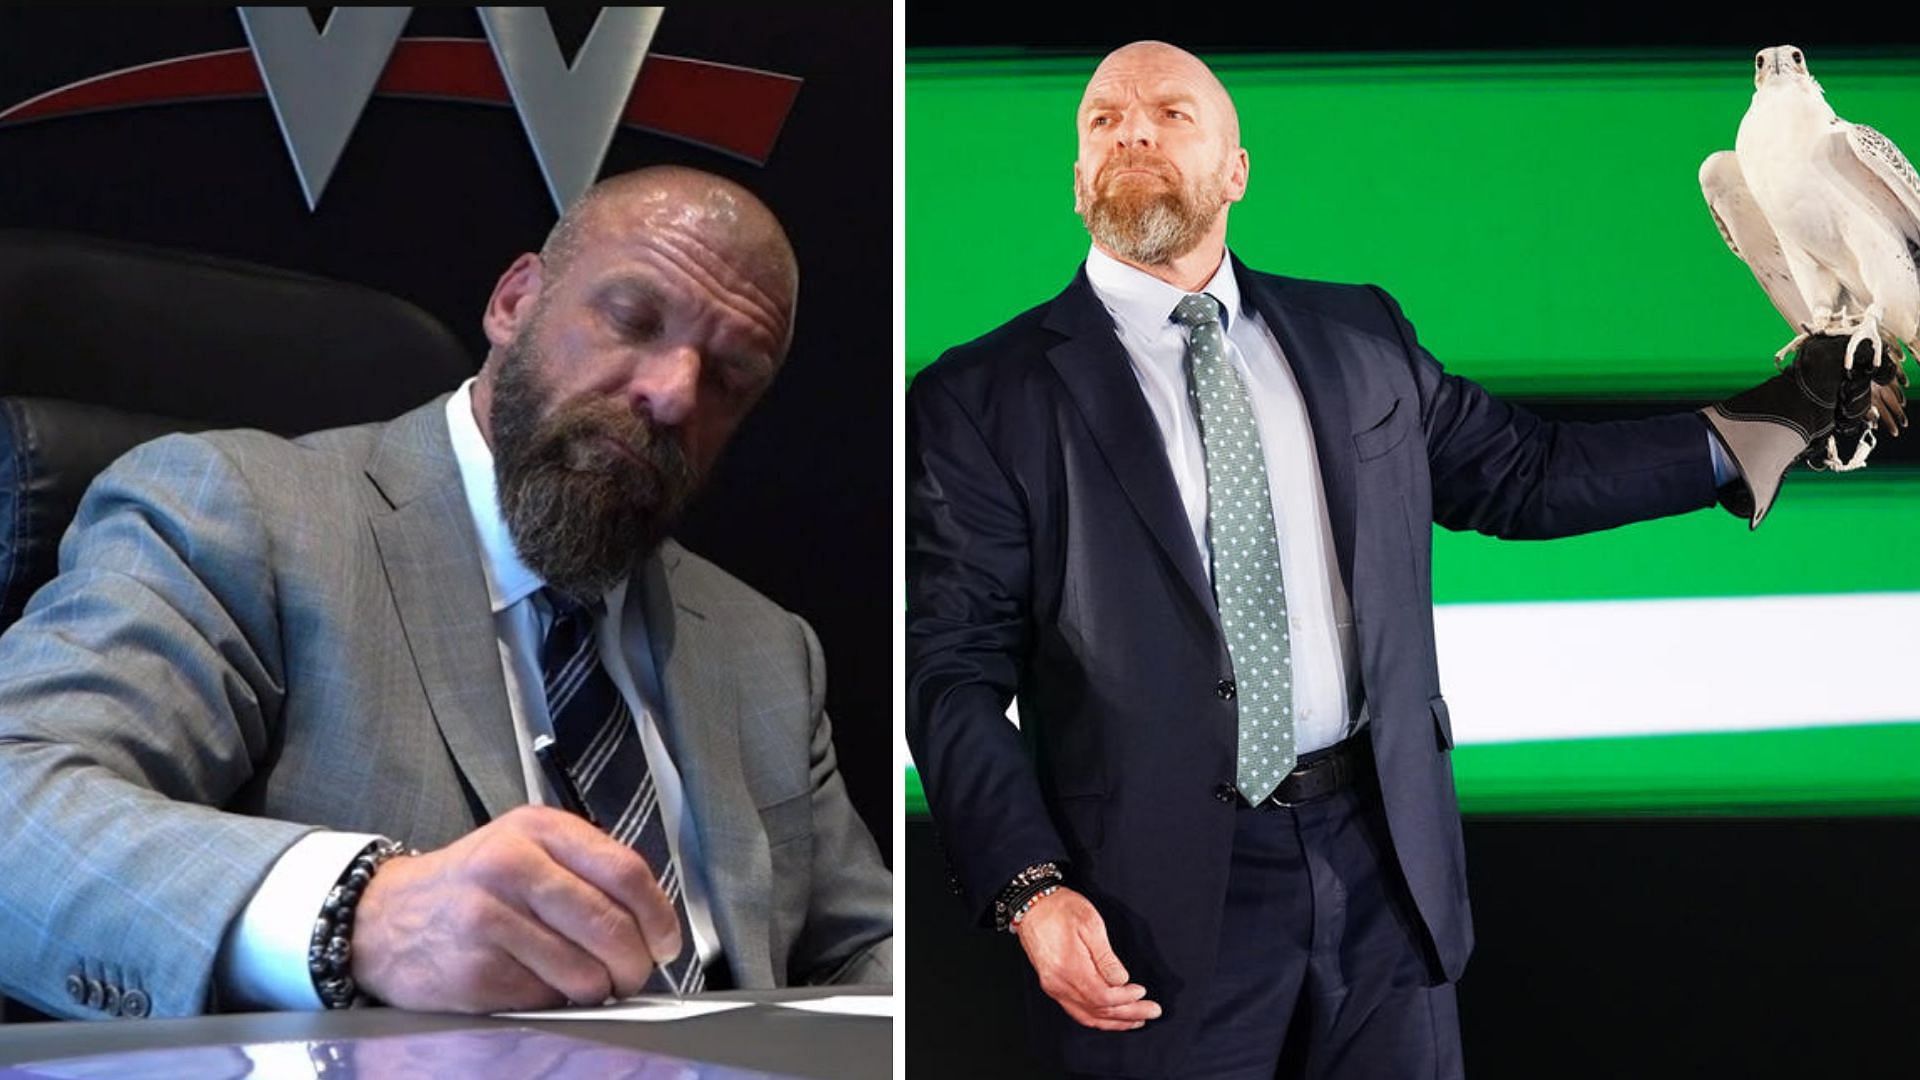 WWE Chief Content Officer Triple H posed with an eagle at Crown Jewel